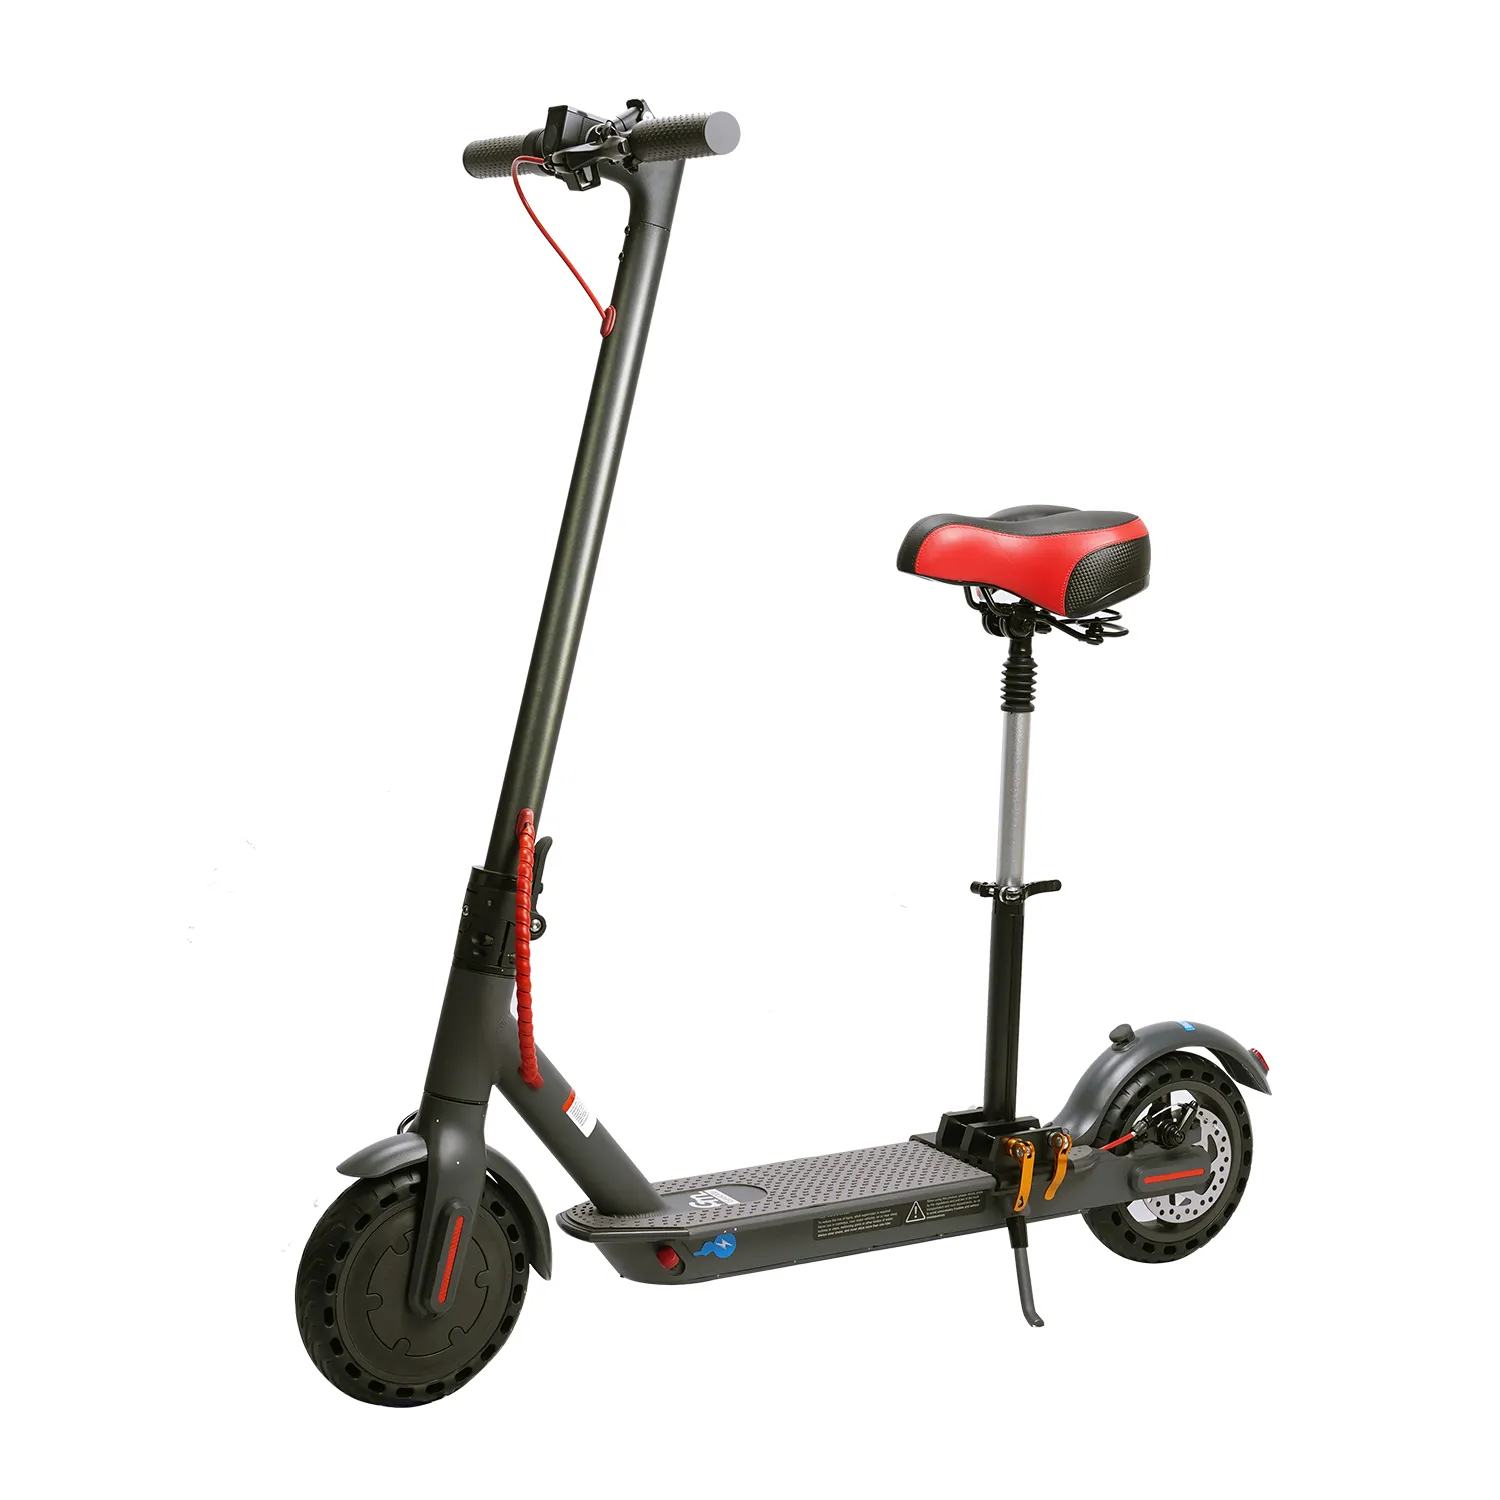 New Geekme Gấp Electric <span class=keywords><strong>Scooter</strong></span> Điện Kick <span class=keywords><strong>Scooter</strong></span> Cho Người Lớn